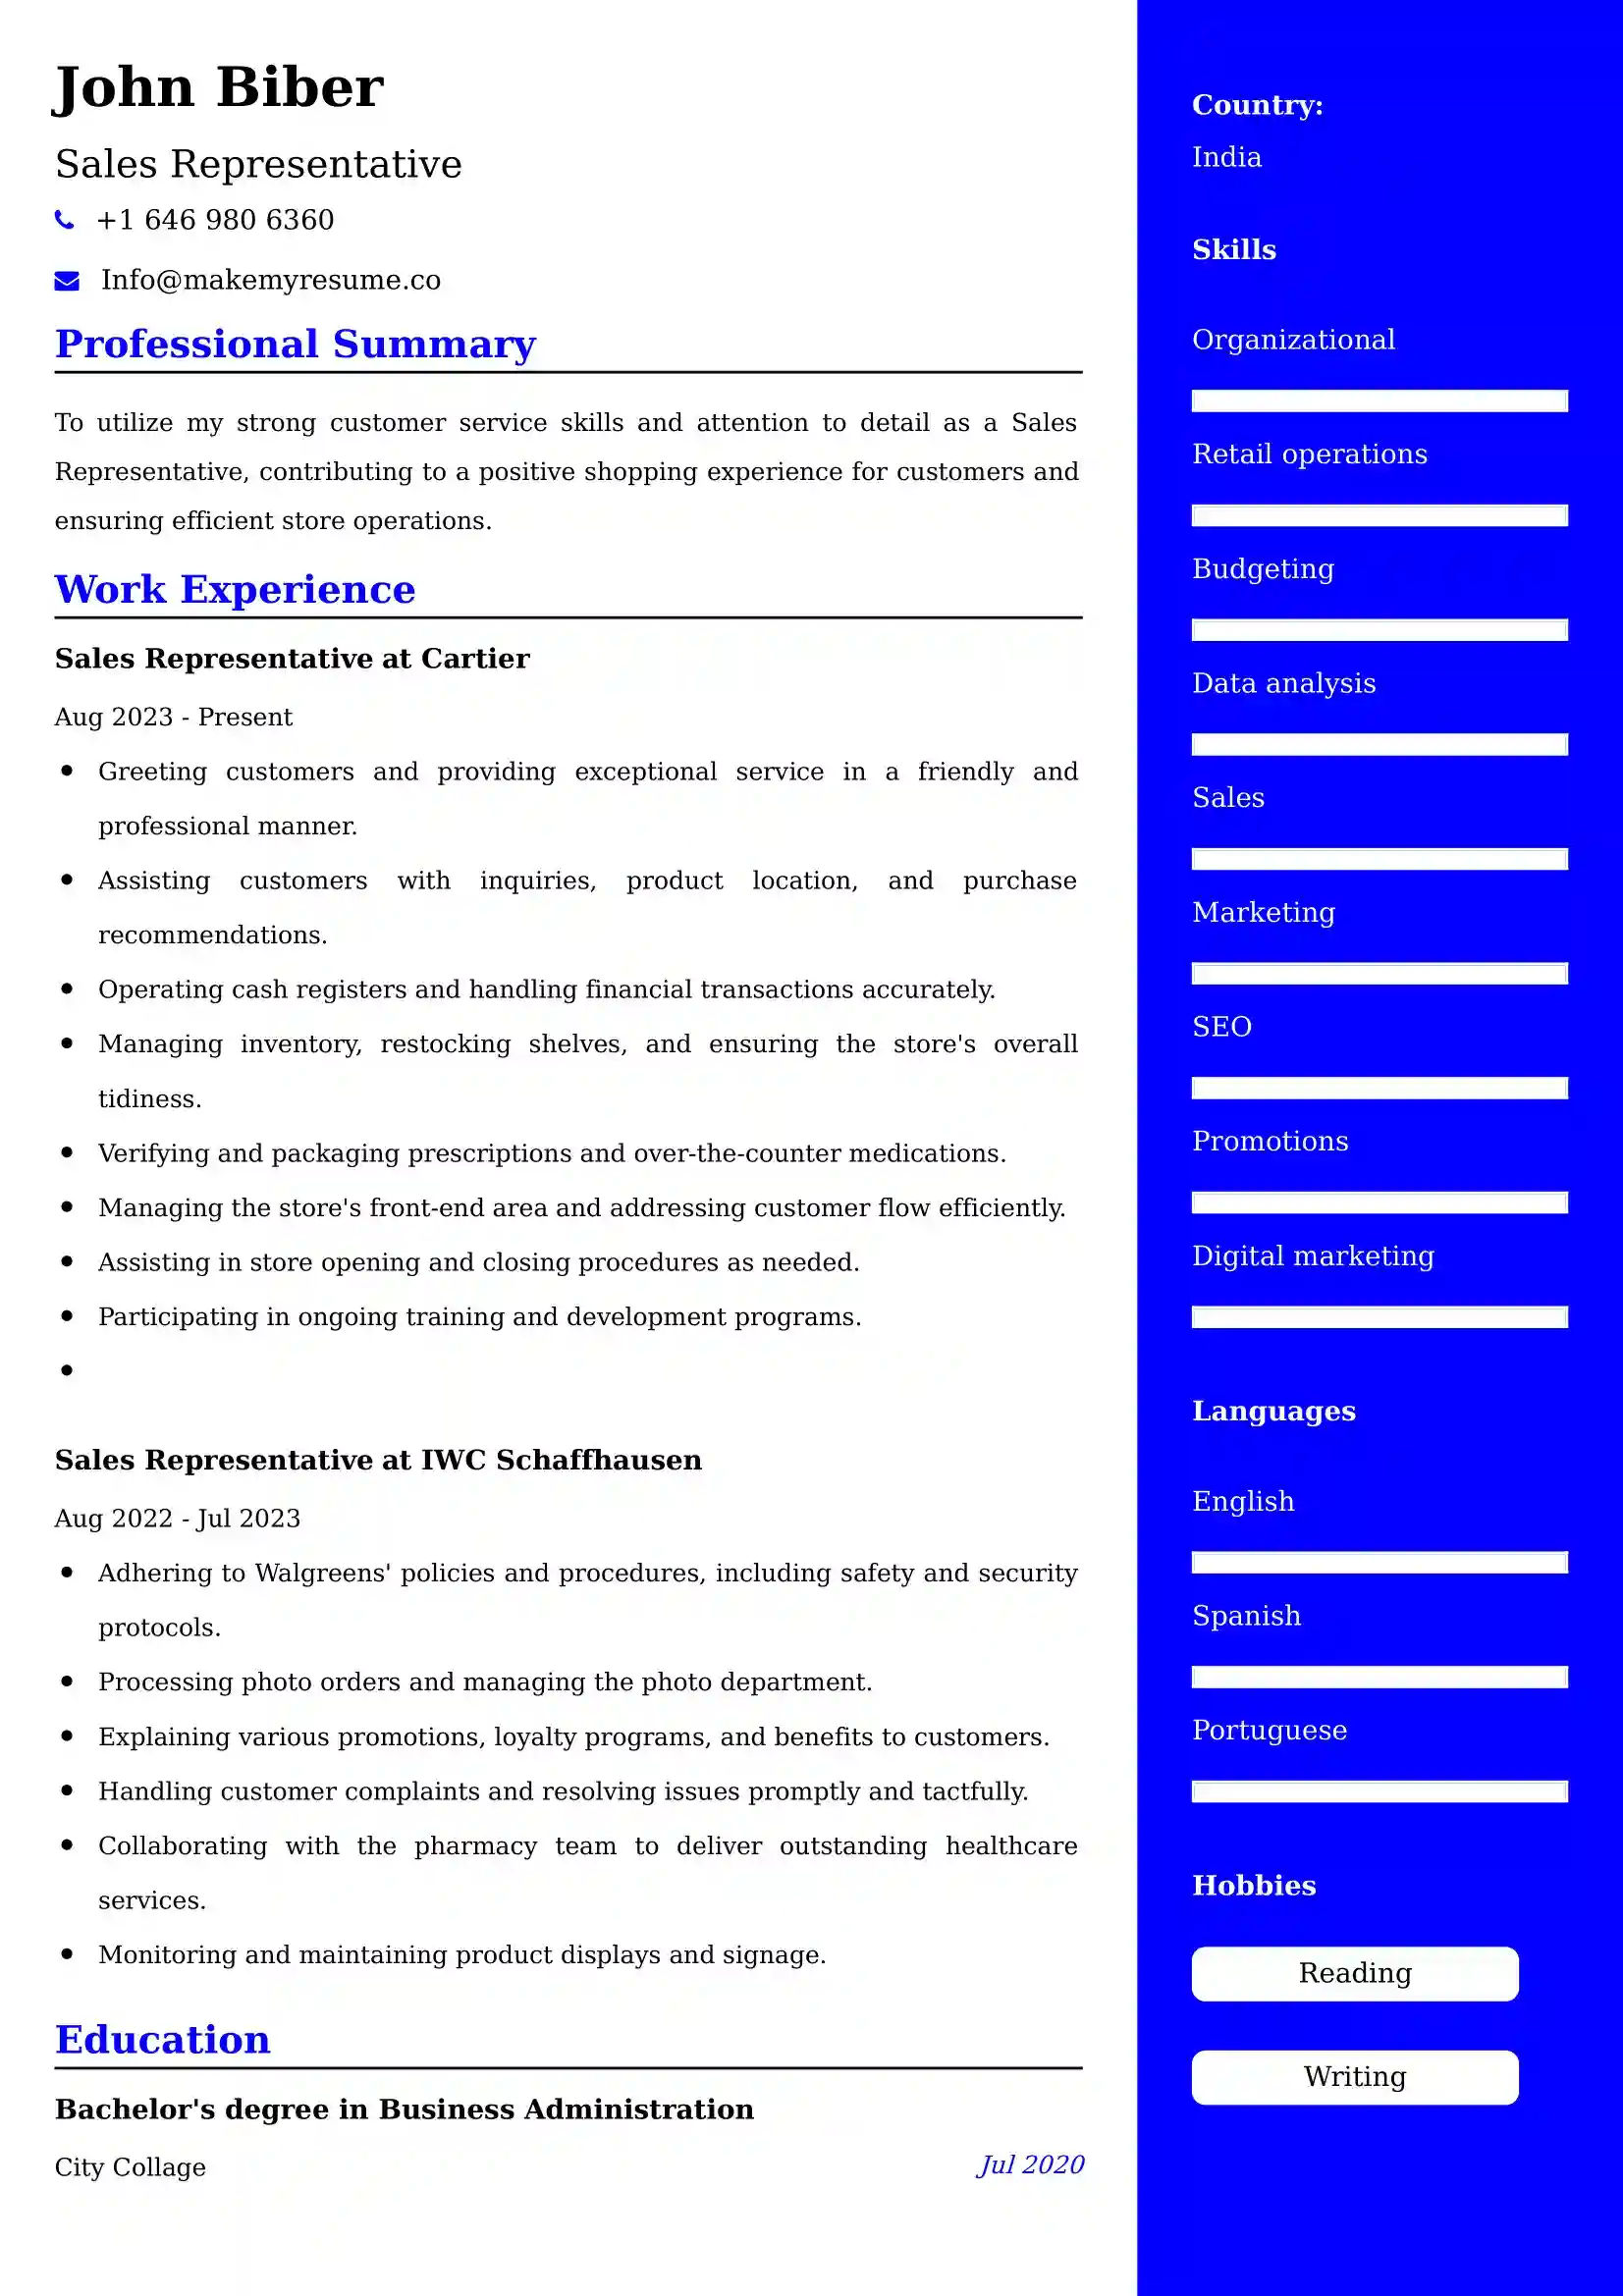 Sales Representative Resume Examples for UK Jobs - Tips and Guide